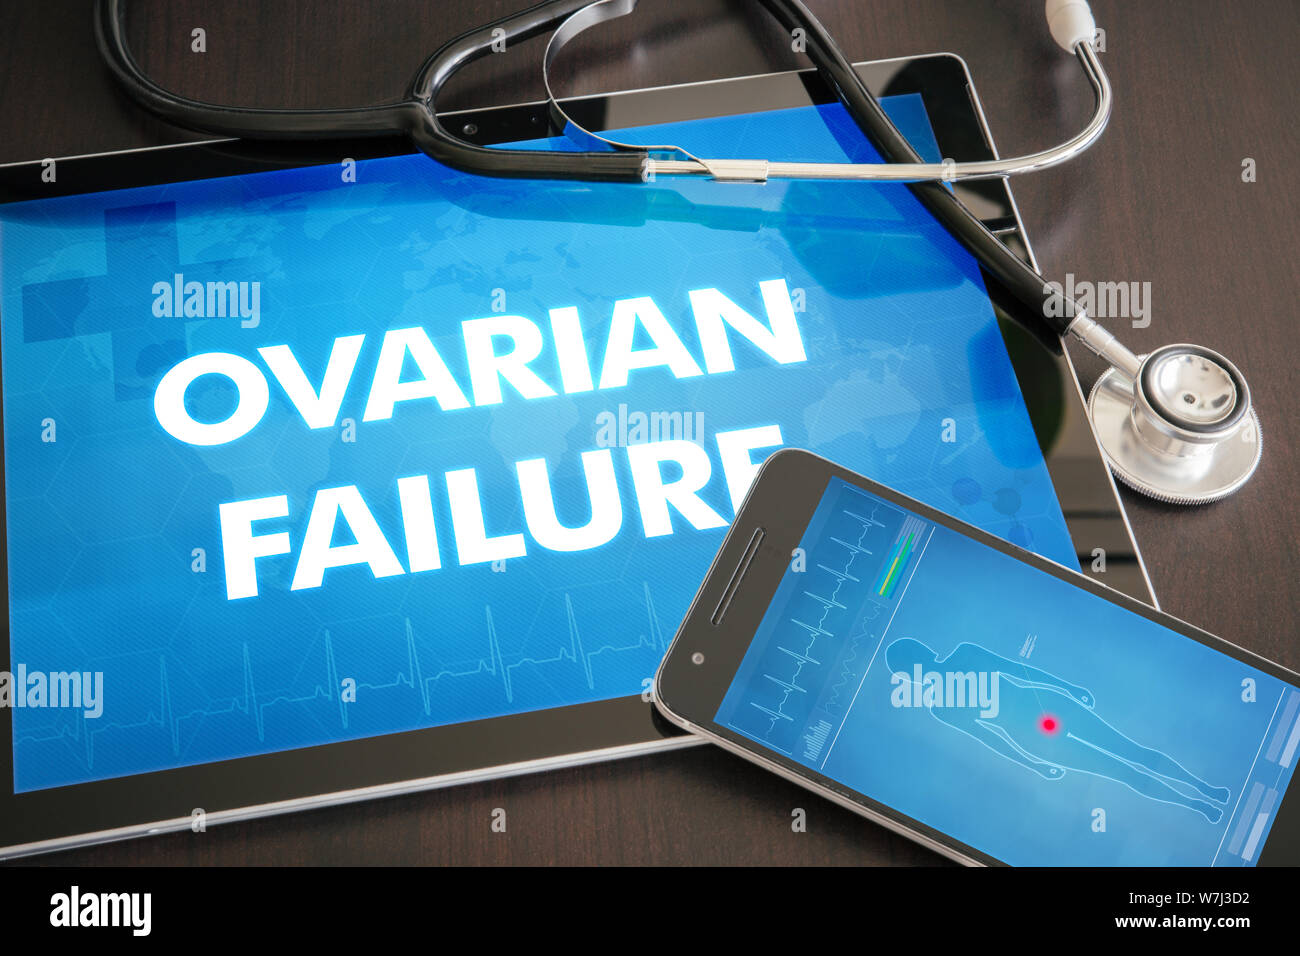 Ovarian failure (endocrine disease) diagnosis medical concept on tablet screen with stethoscope. Stock Photo